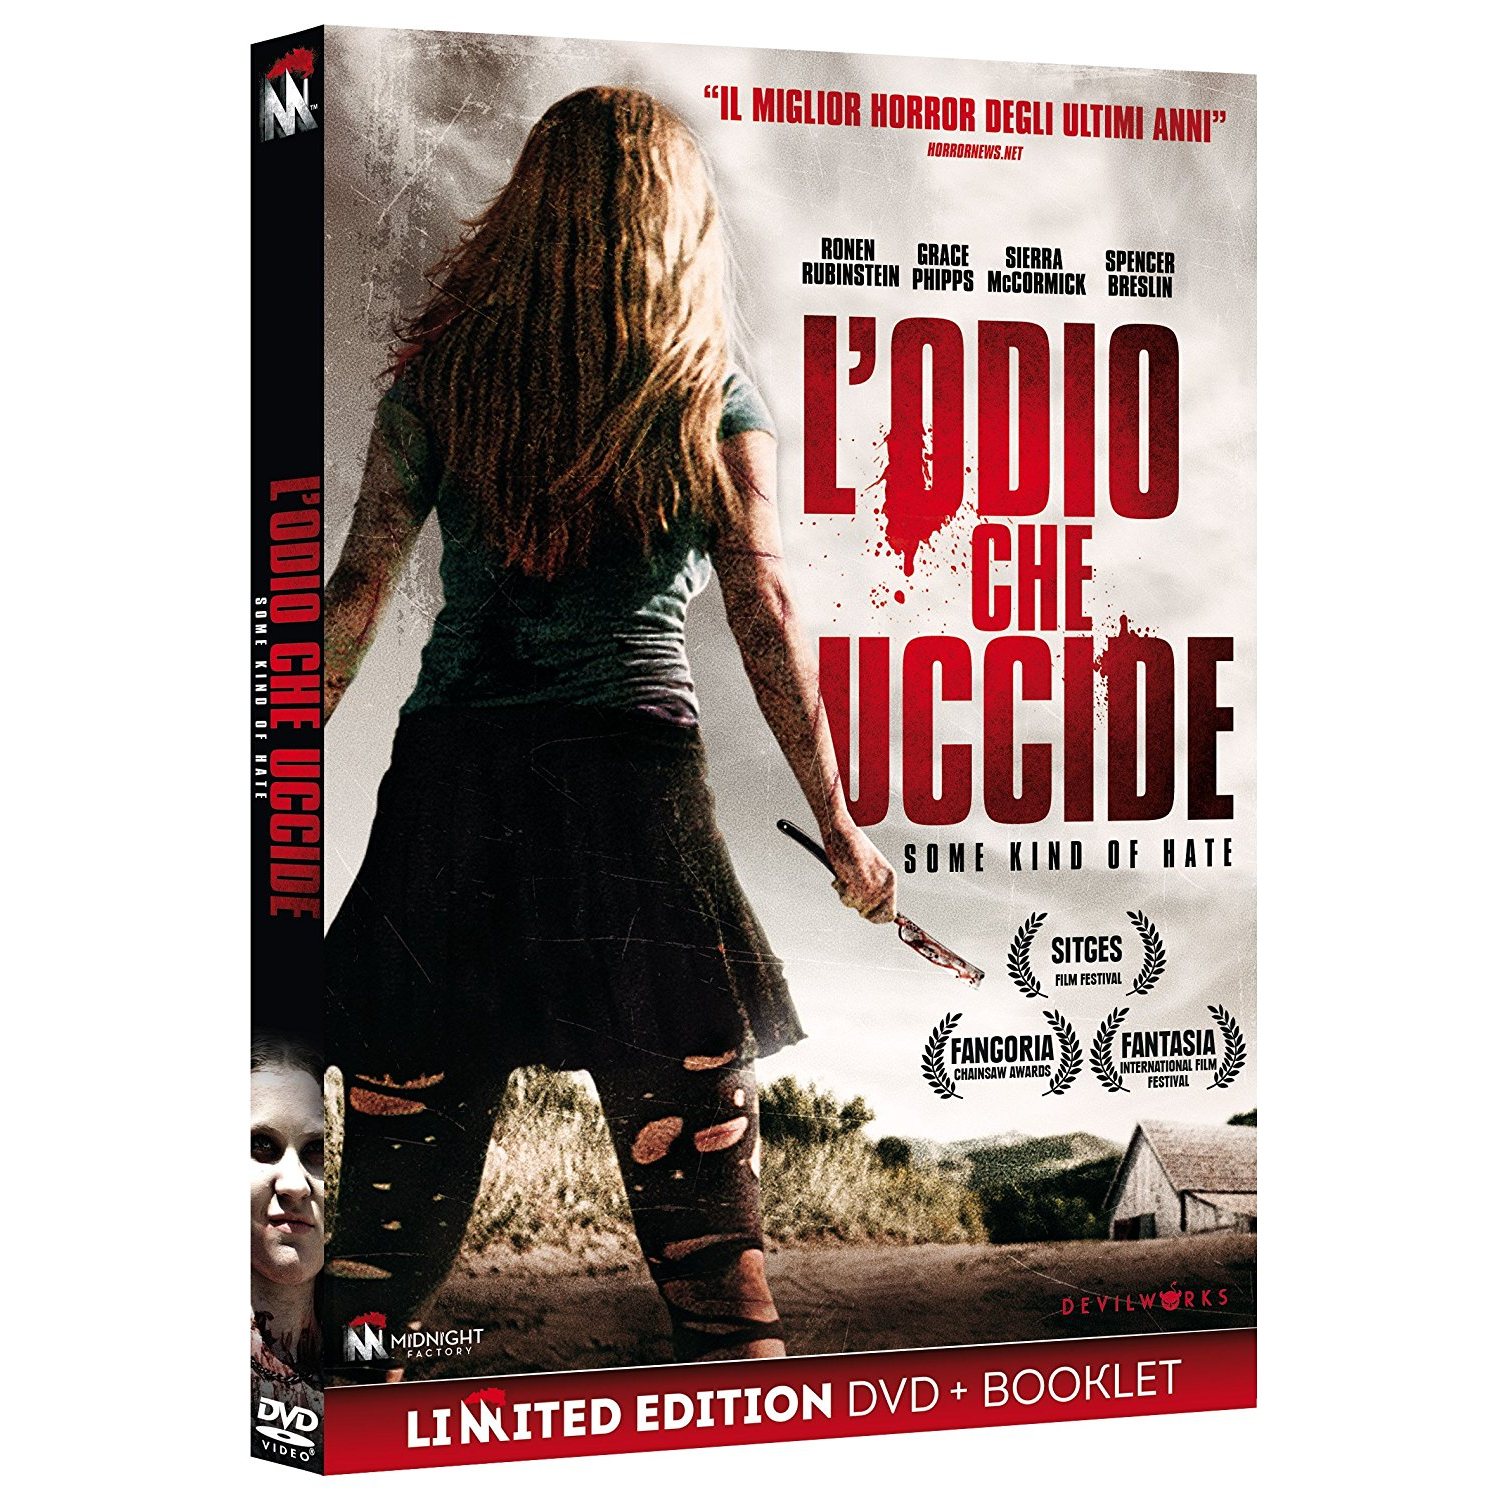 ODIO CHE UCCIDE (L') - SOME KIND OF HATE (LTD) (DVD+BOOKLET)